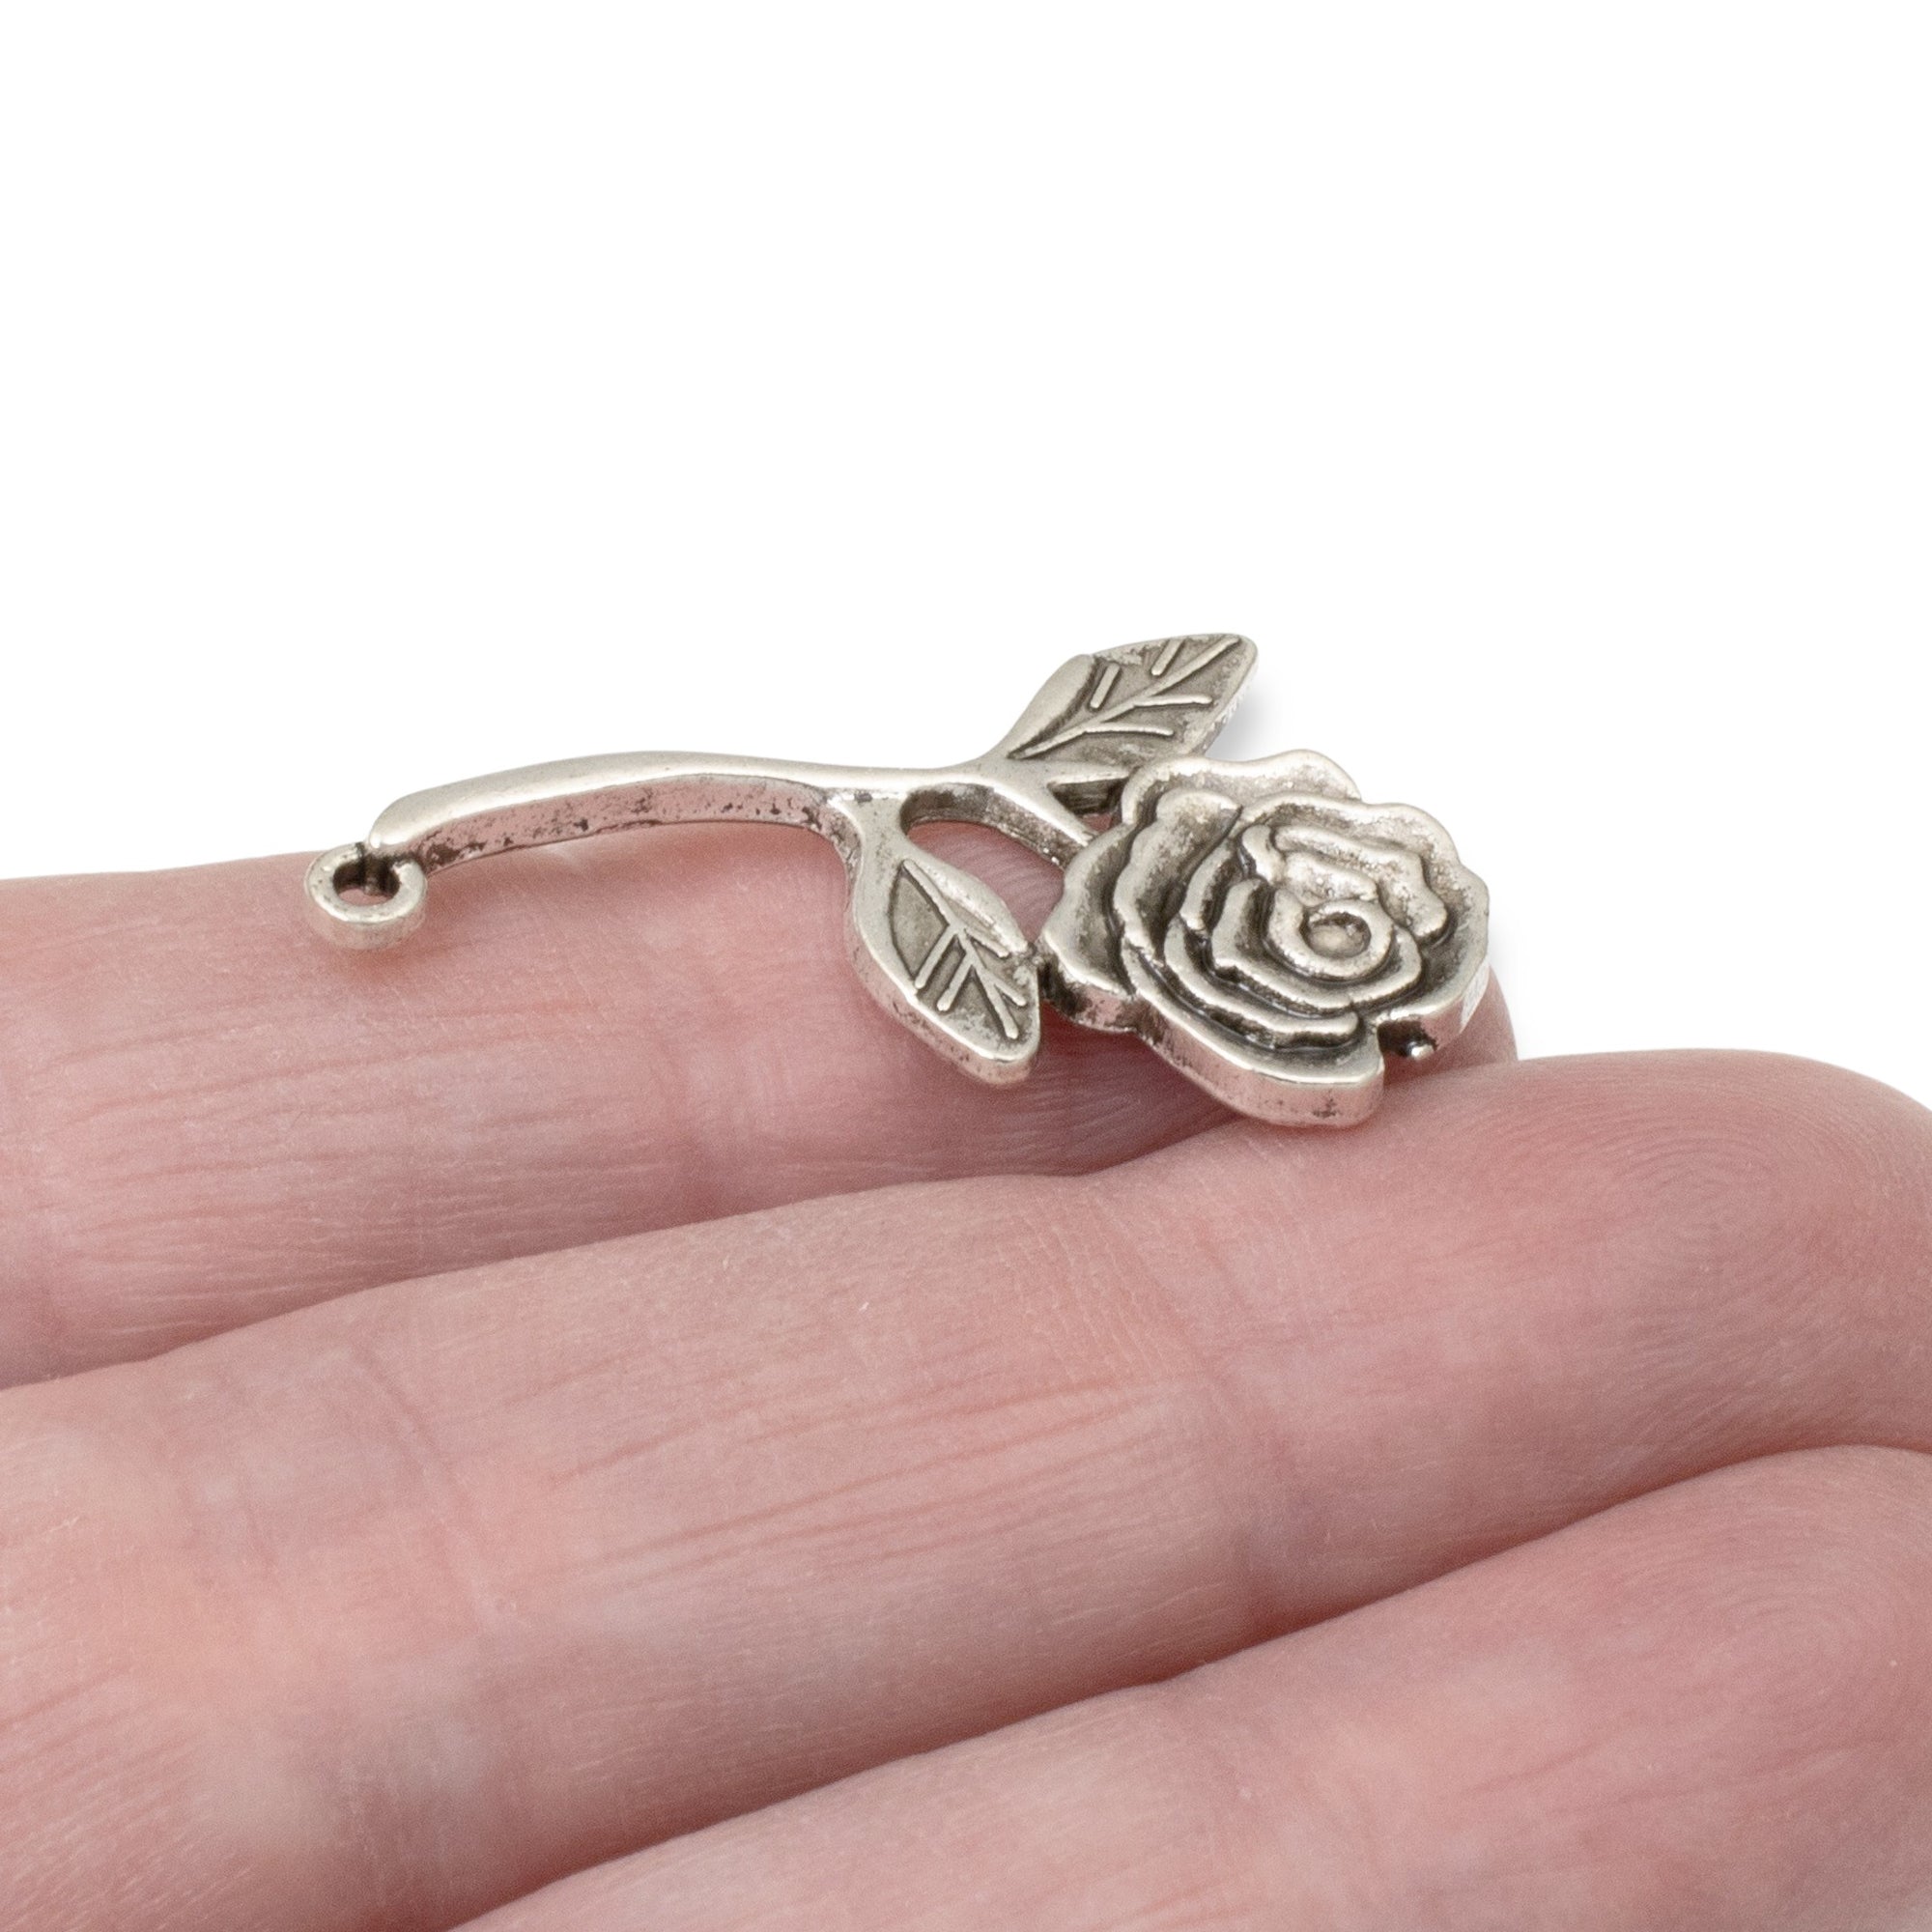 12 Rose Charms for Jewelry Making | Hackberry Creek